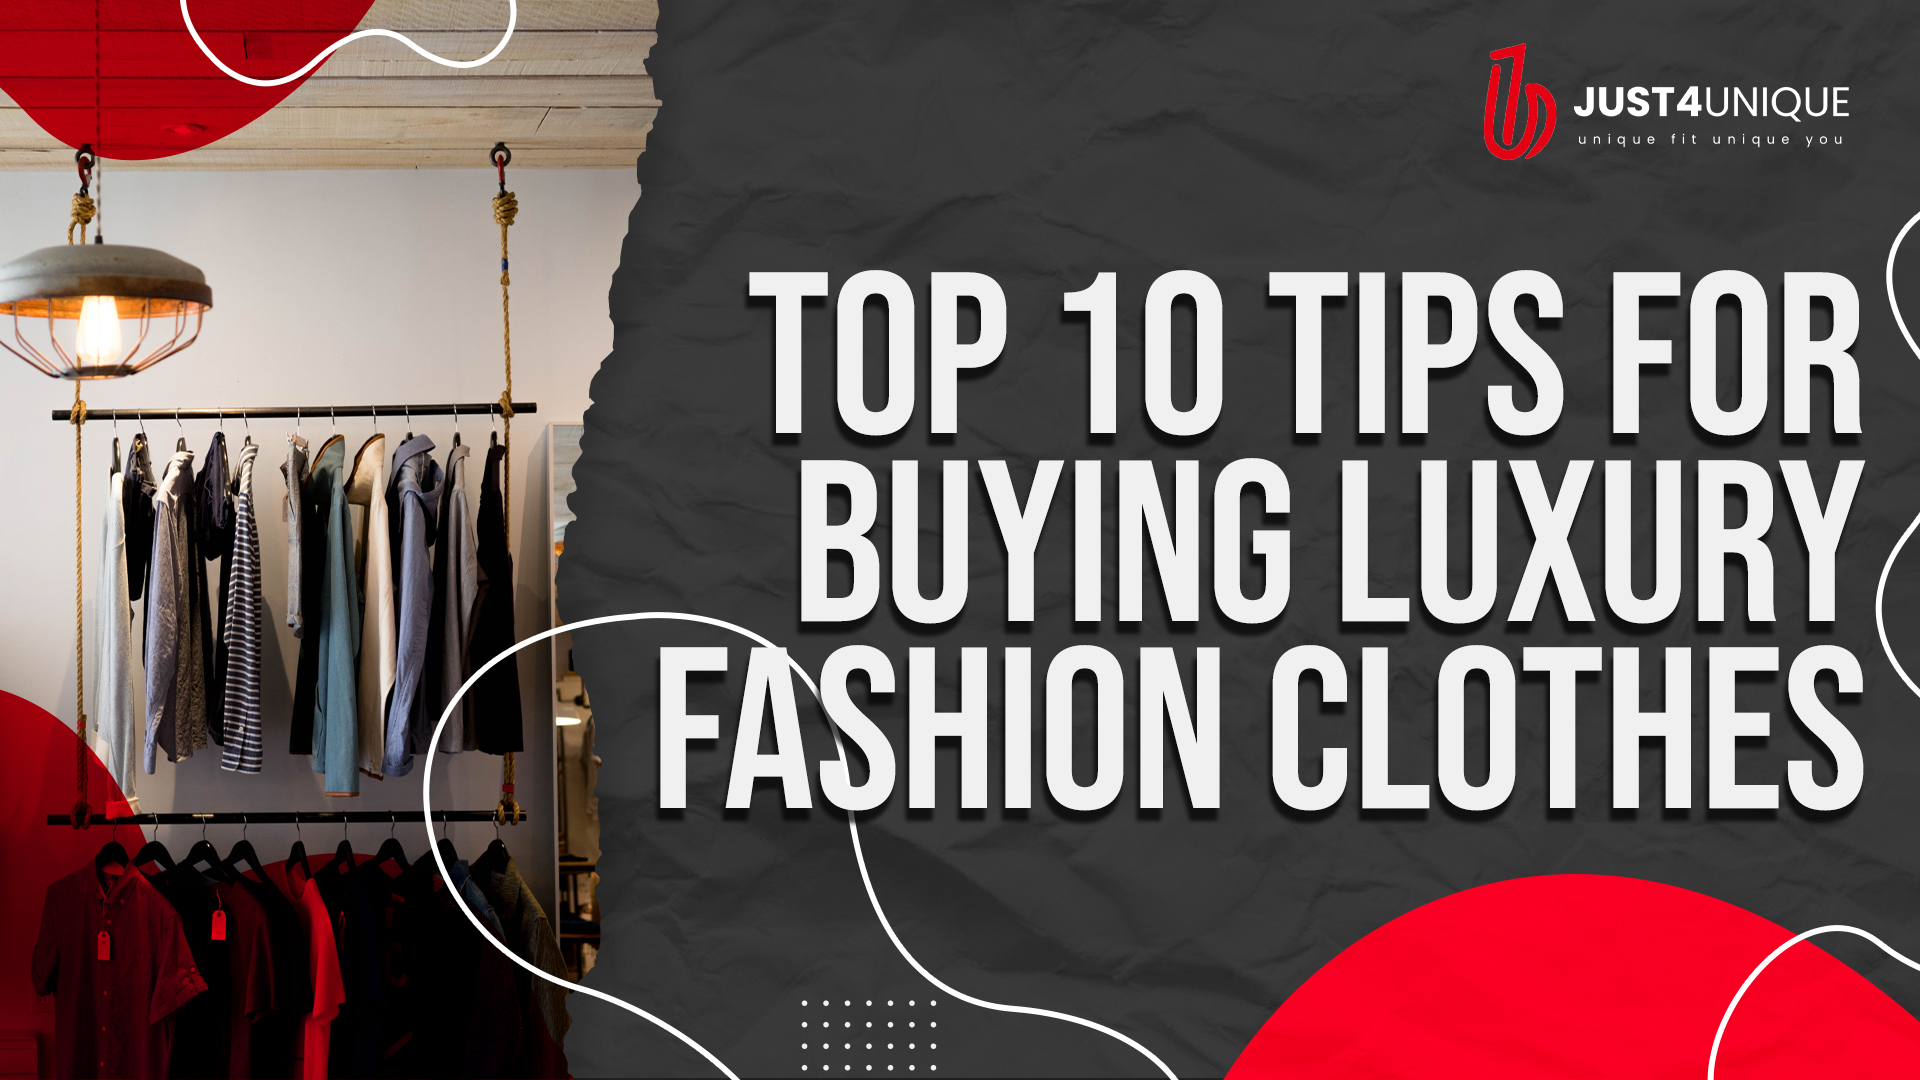 Top 10 Tips for Buying Luxury Fashion Clothes